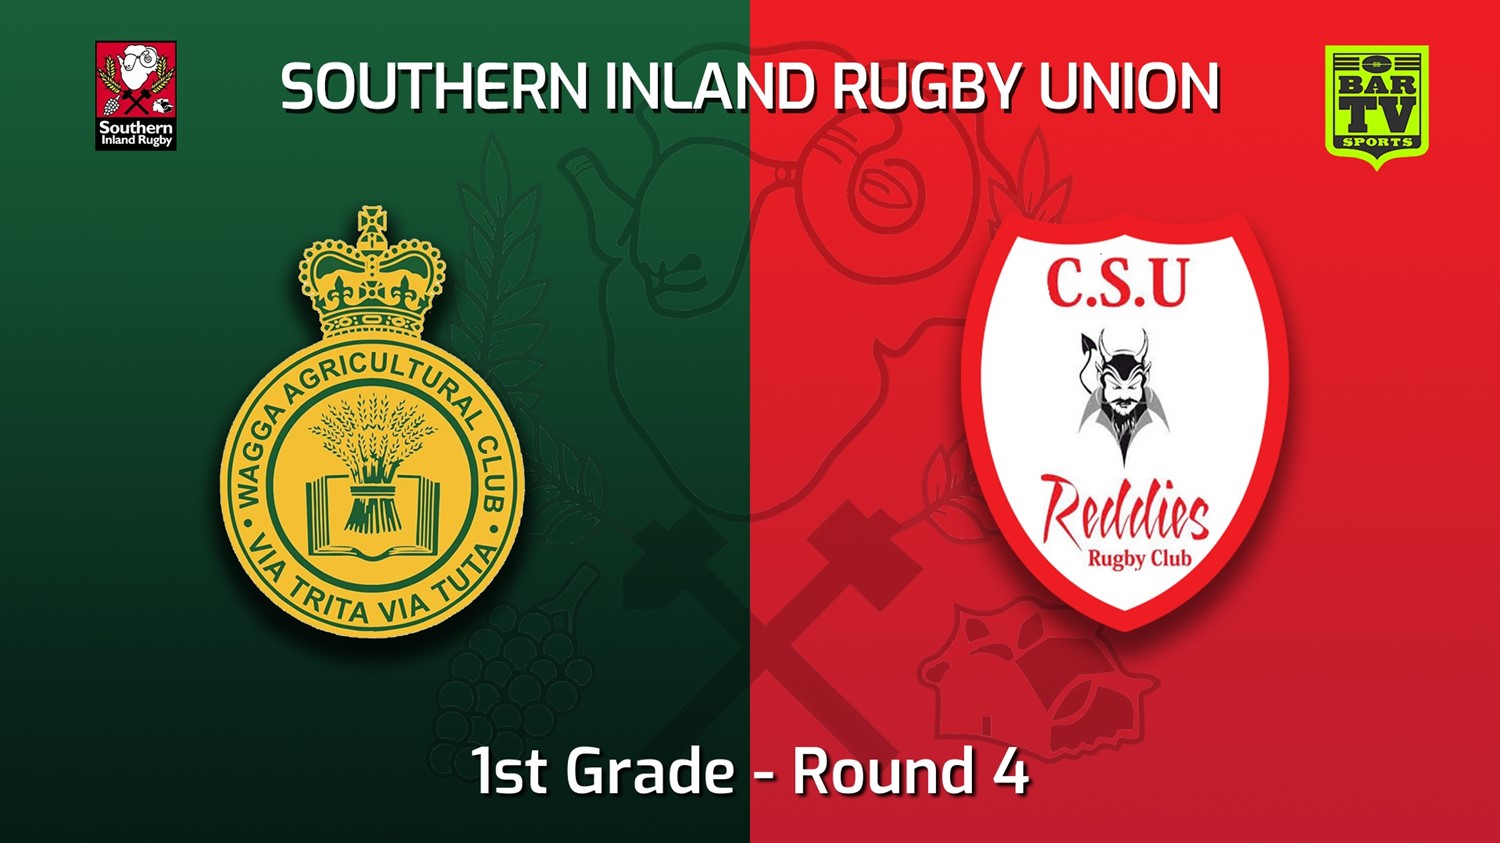 220430-Southern Inland Rugby Union Round 4 - 1st Grade - Wagga Agricultural College v CSU Reddies Minigame Slate Image